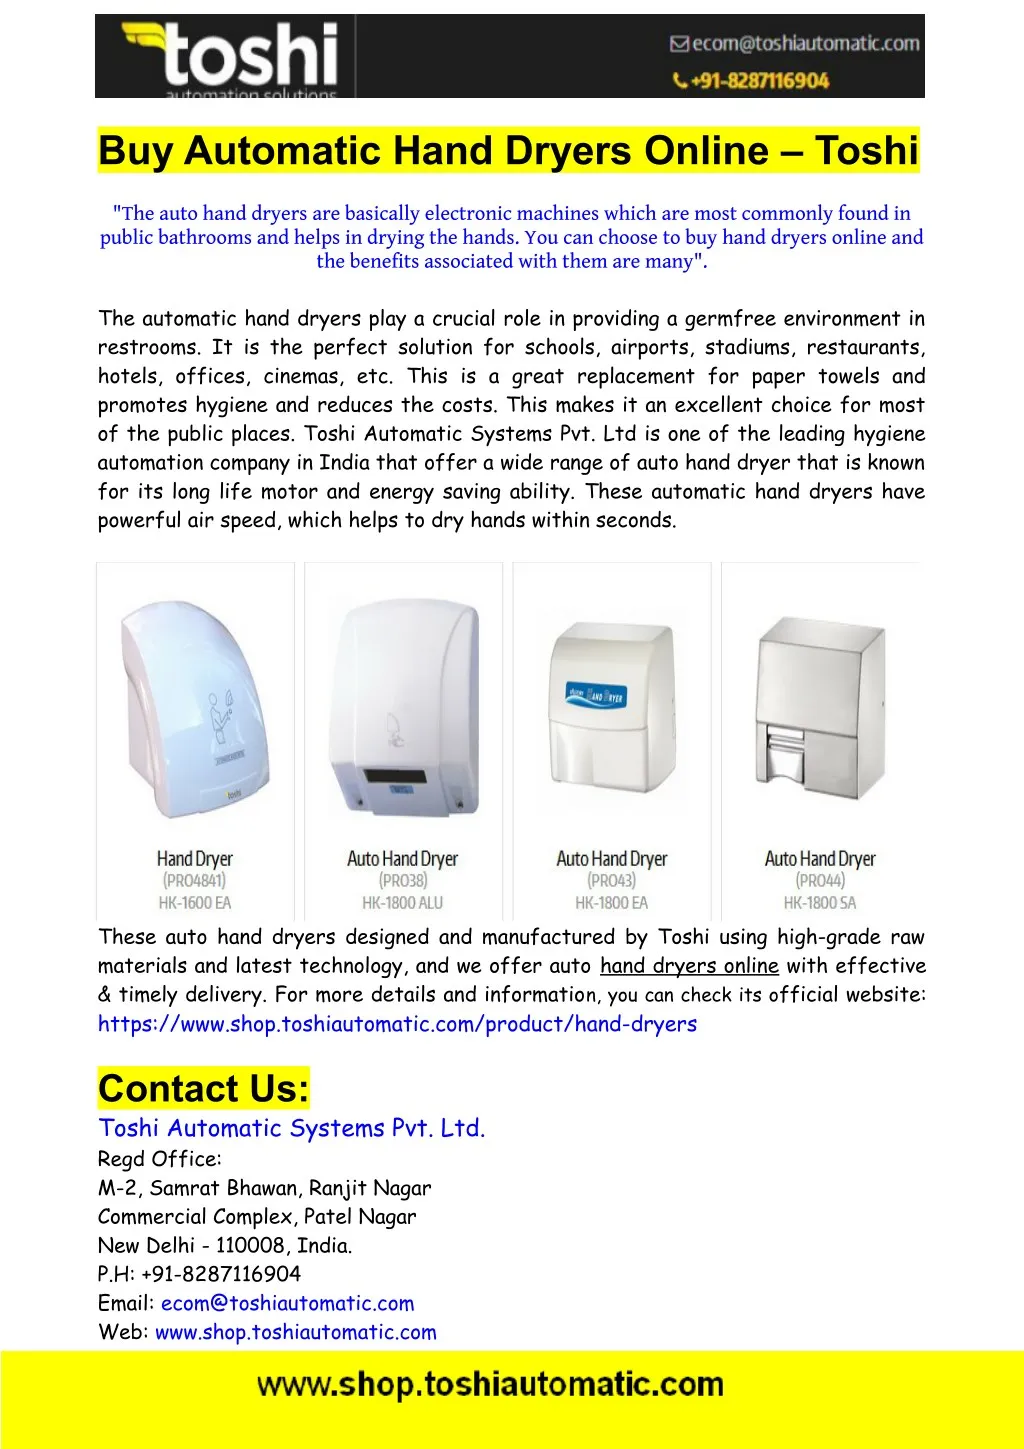 buy automatic hand dryers online toshi